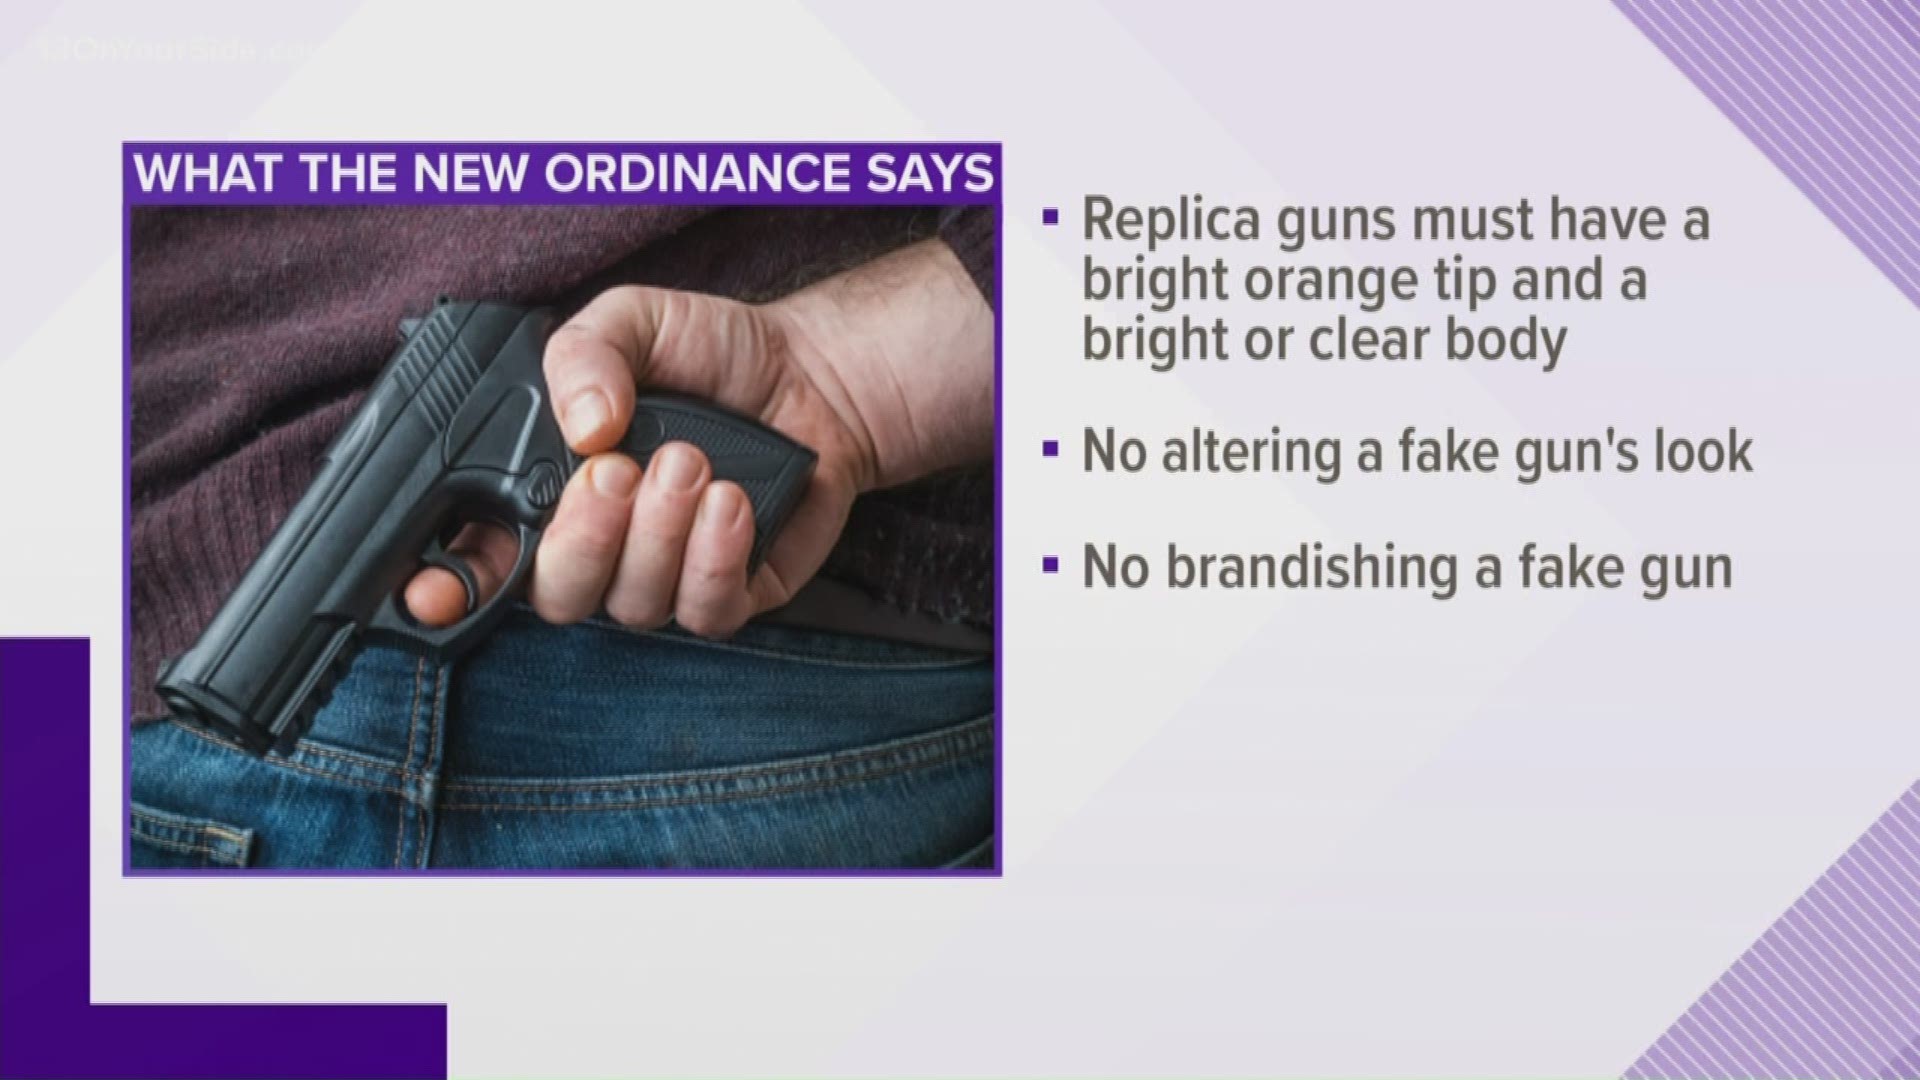 Grand Rapids Police have taken 106 imitation and pneumatic guns off the street since January 2018.